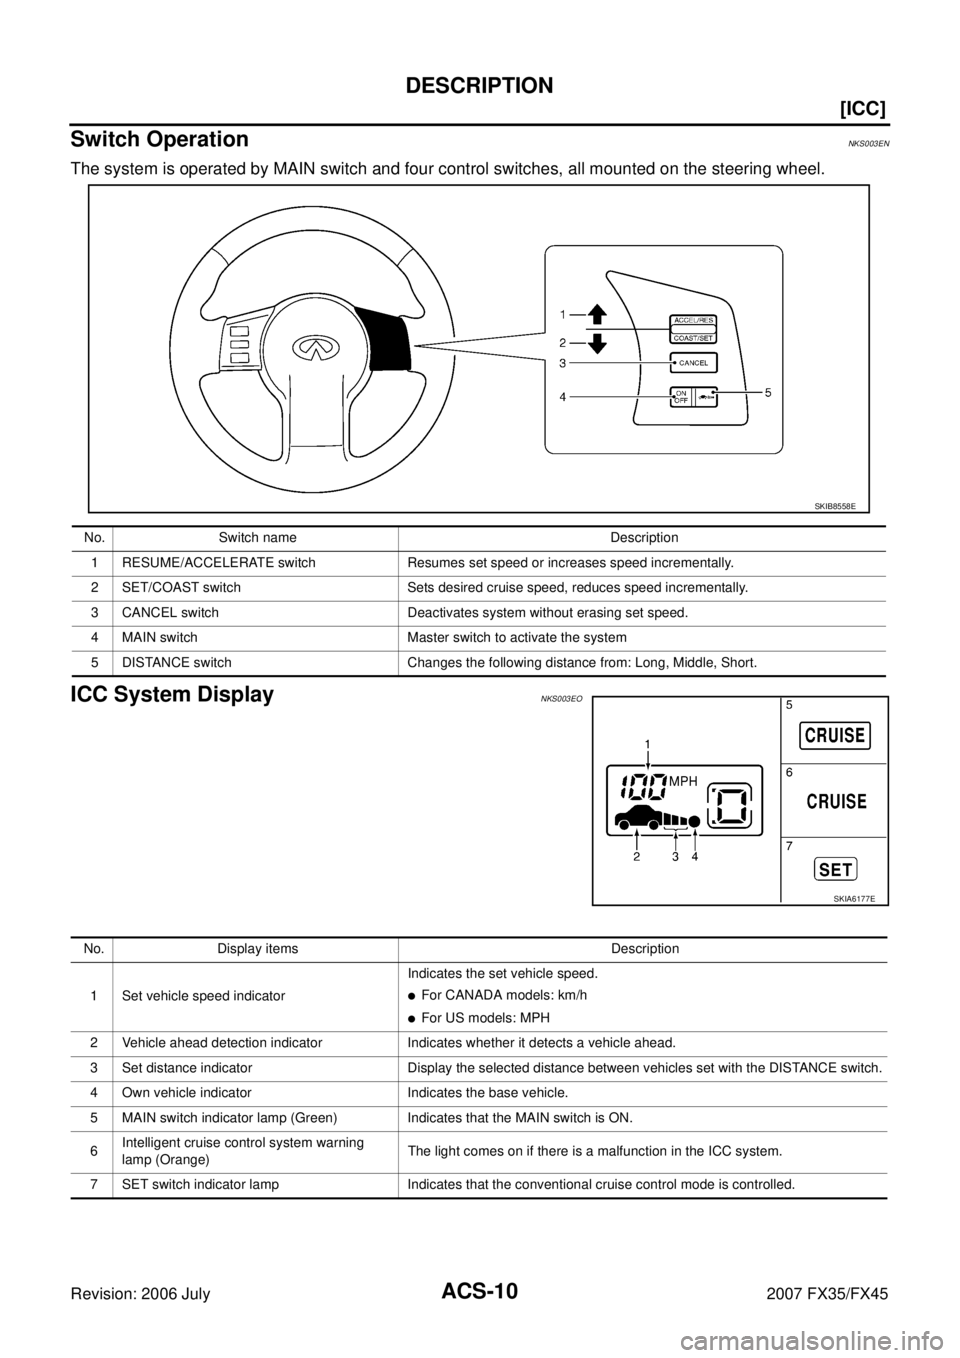 INFINITI FX35 2007 User Guide ACS-10
[ICC]
DESCRIPTION
Revision: 2006 July 2007 FX35/FX45
Switch OperationNKS003EN
The system is operated by MAIN switch and four control switches, all mounted on the steering wheel.
ICC System Disp